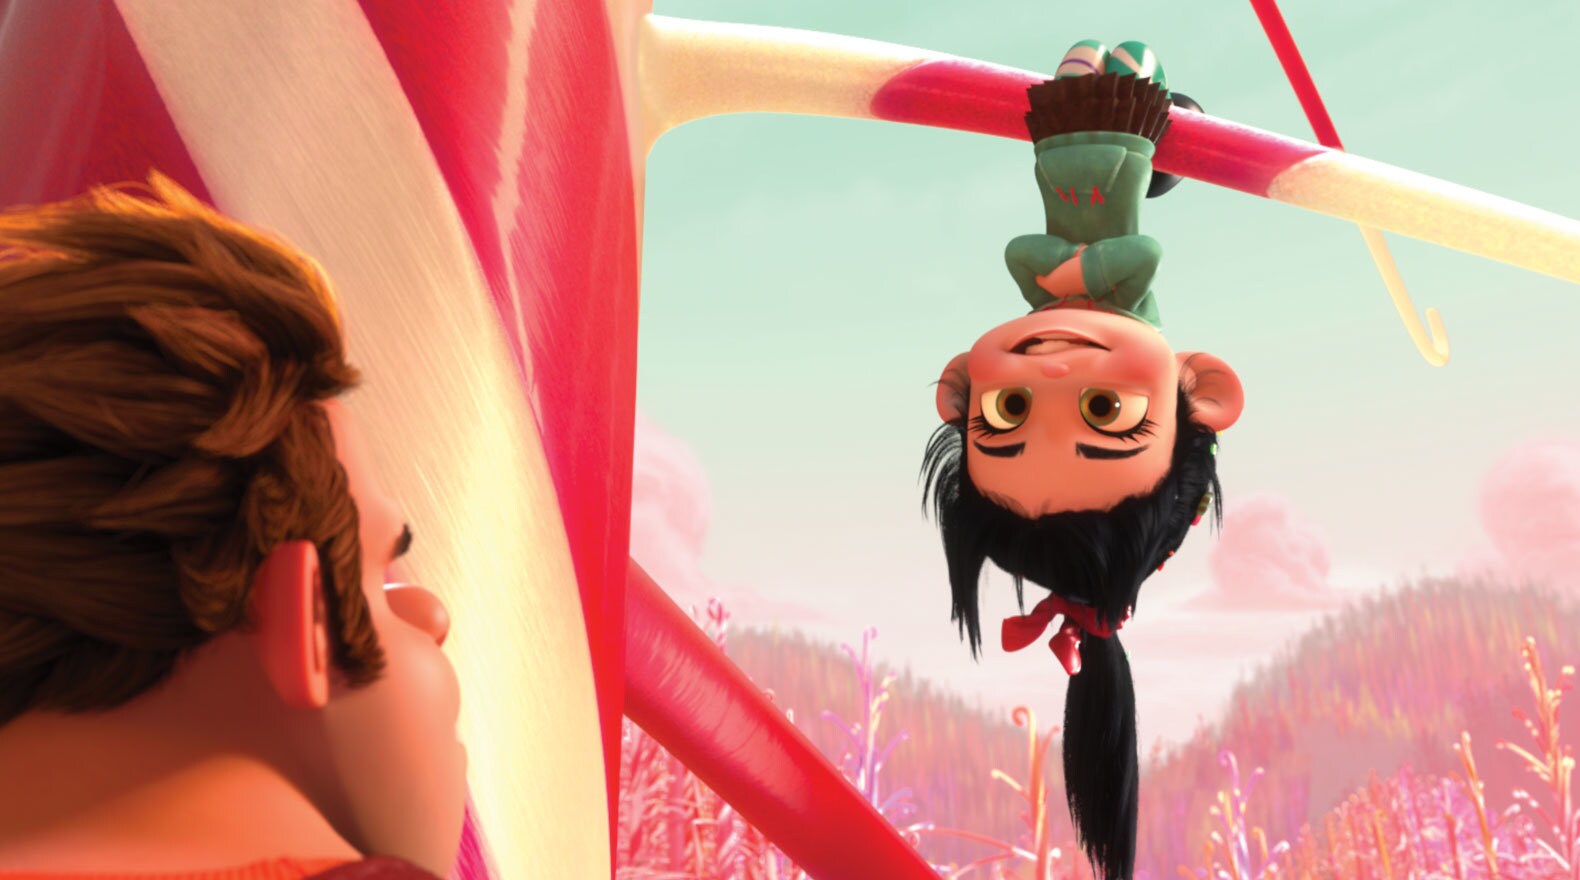 Sarah Silverman as Vanellope hanging upside-down looking at Ralph, played by John C. Riley in "Wreck-It Ralph"